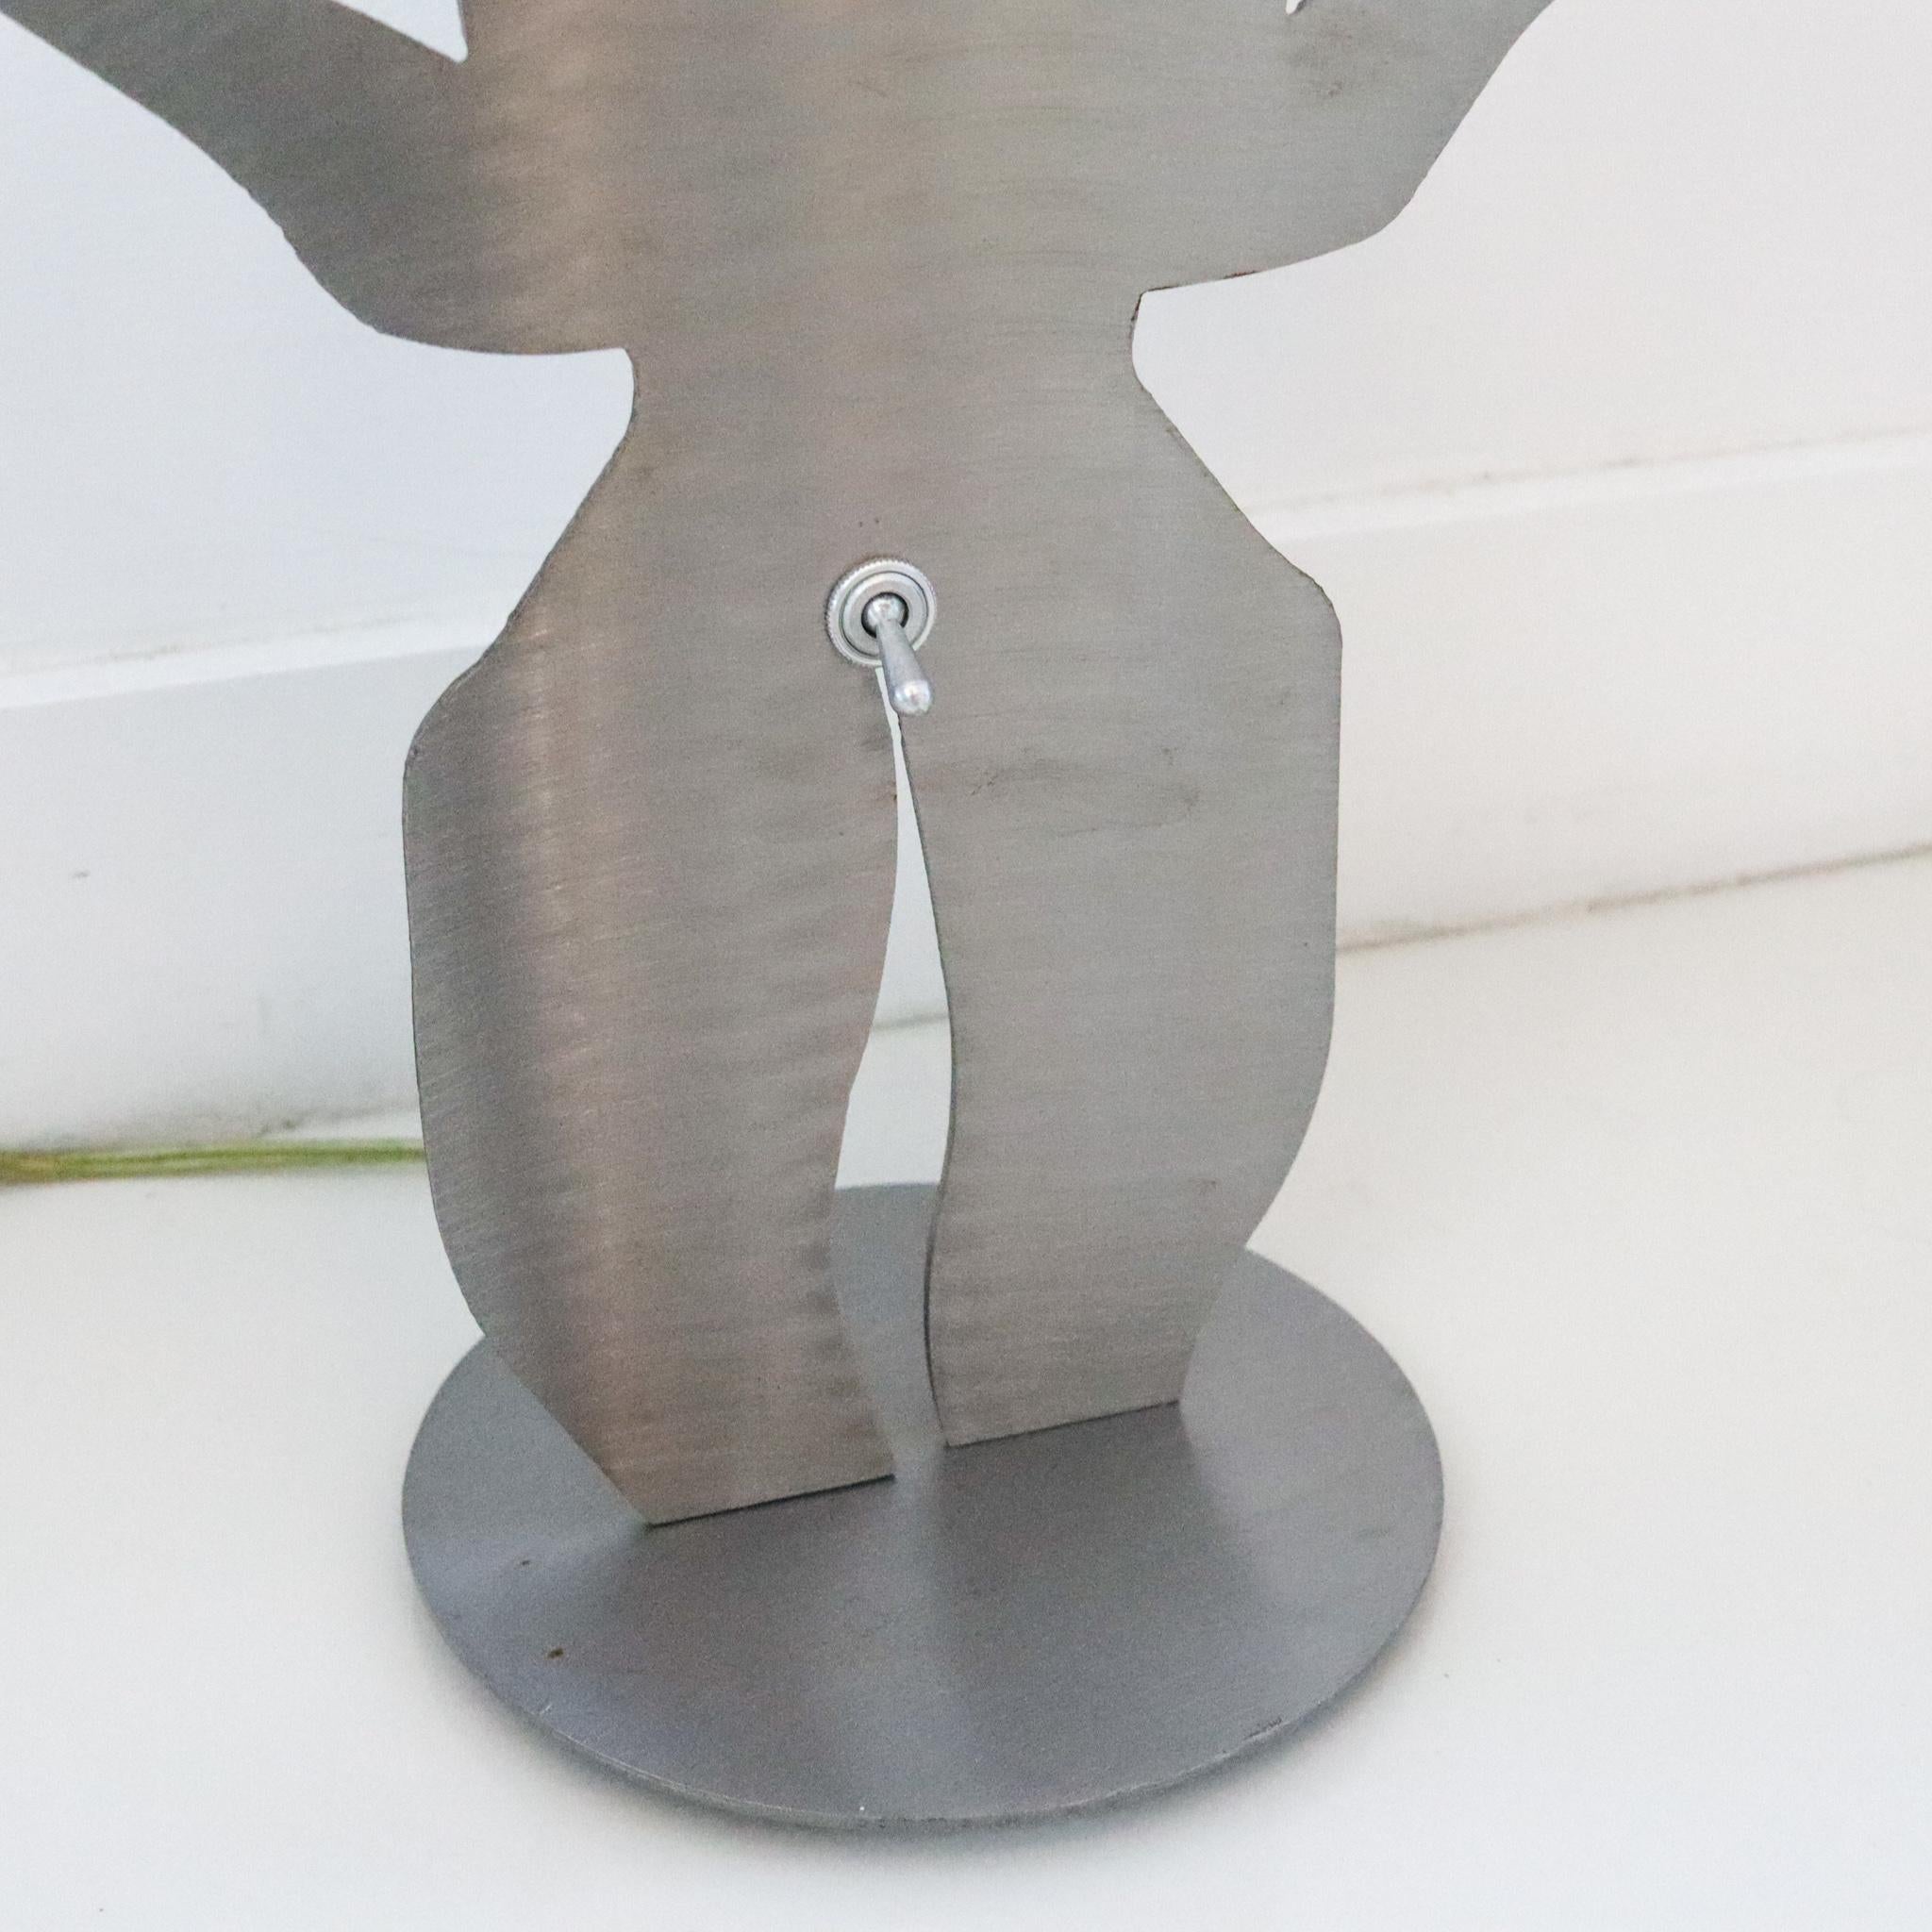 Late 20th Century Postmodernist 1980 Memphis Pop-Art Lamp In Stainless Steel In The Shape of Man For Sale